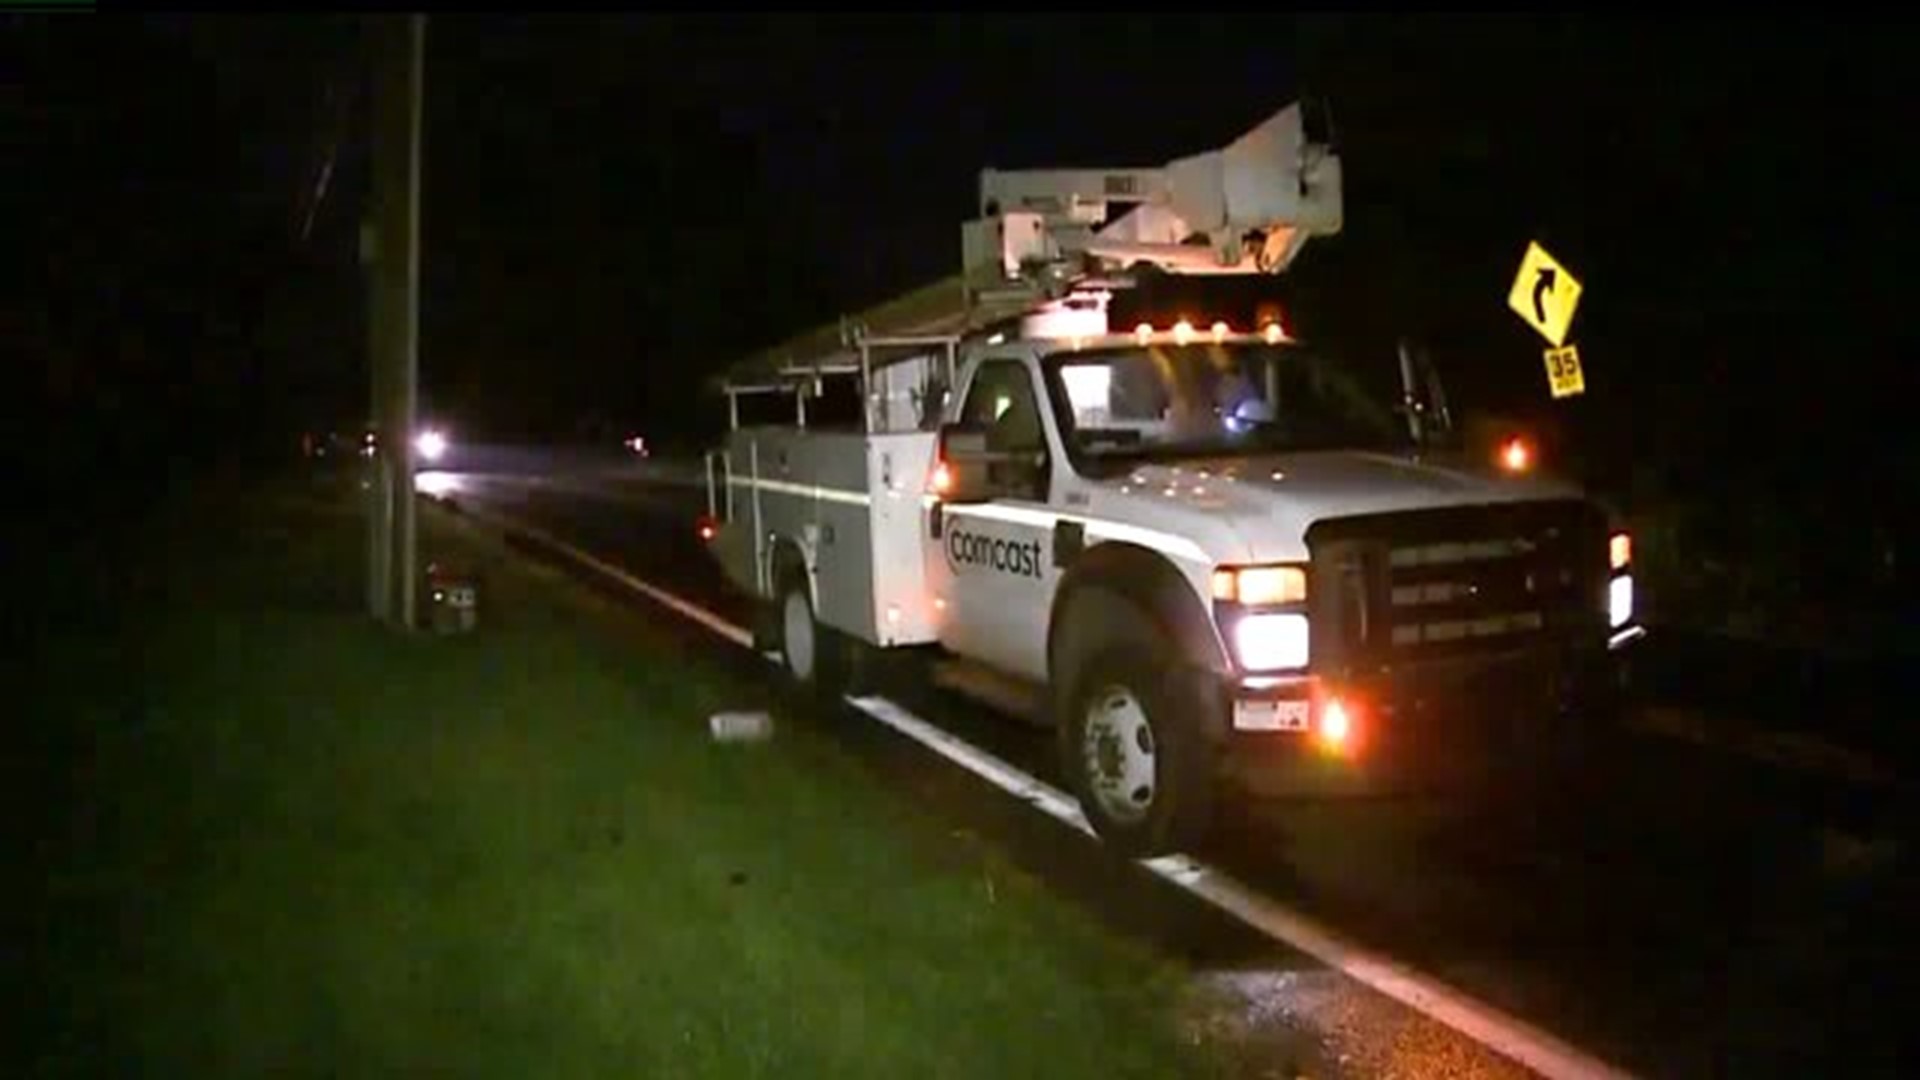 Swift storm knocks out power: "Never seen anything like this"